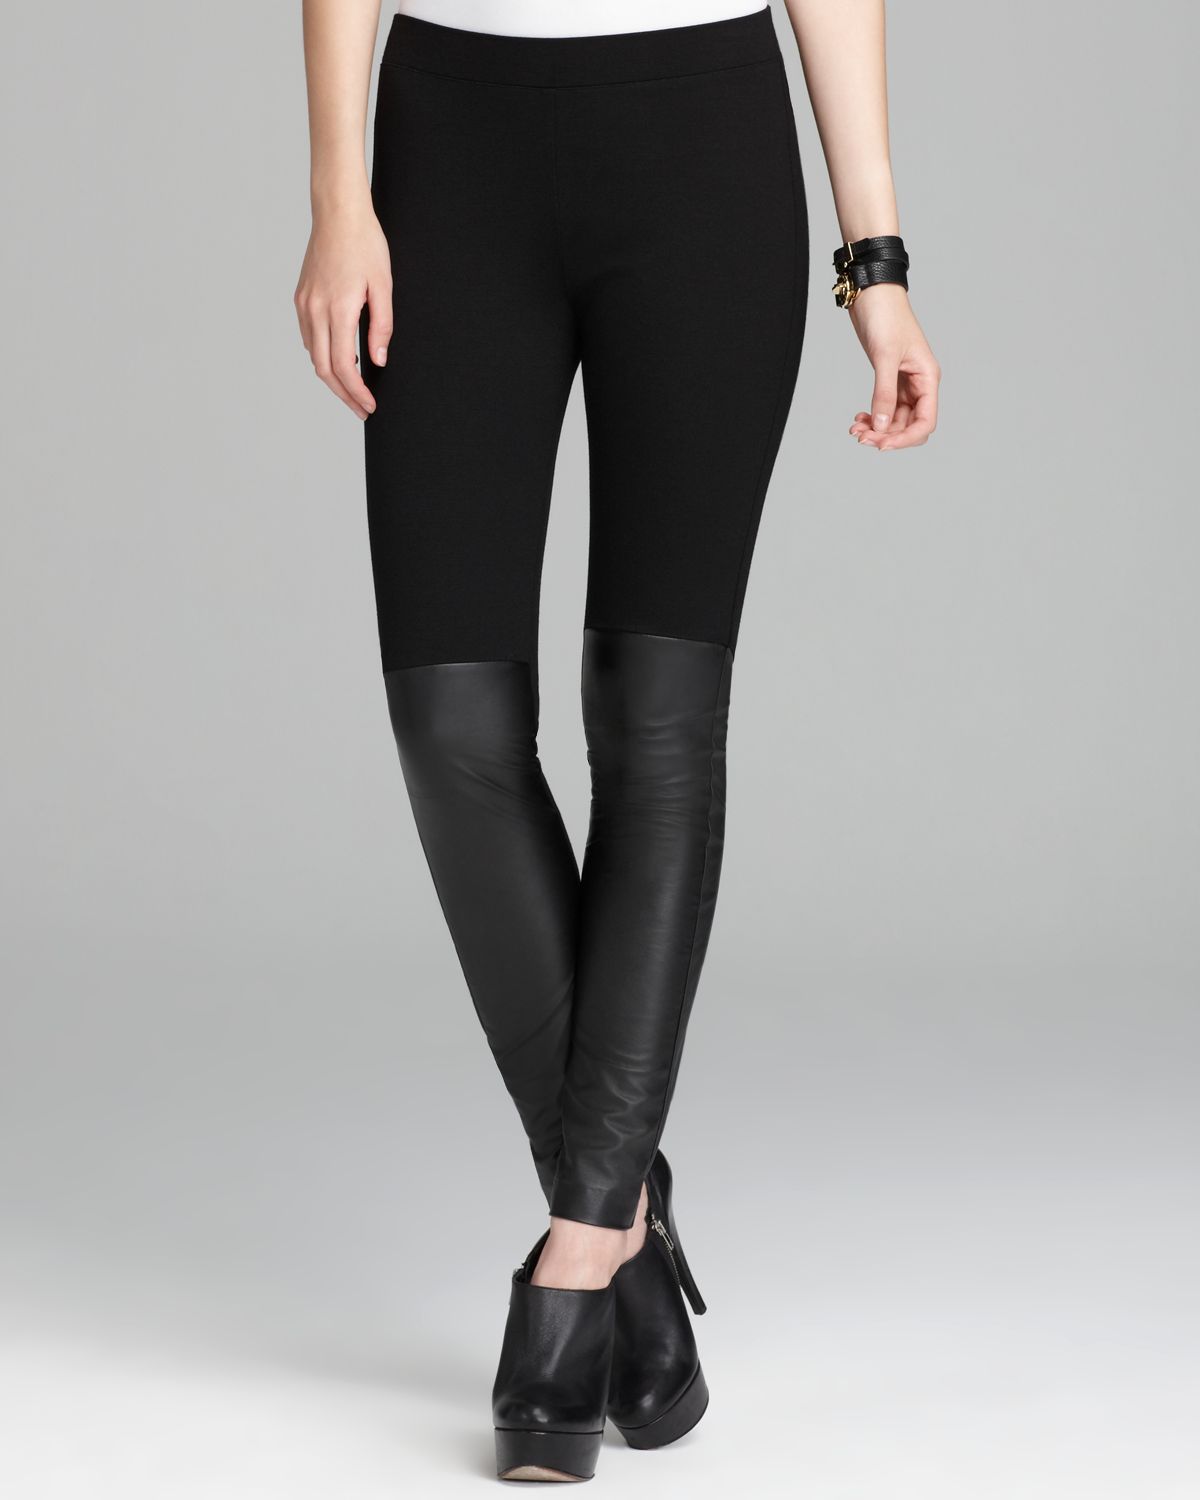 DKNY Leggings with Leather Front Panels in Black/Black (Black) - Lyst